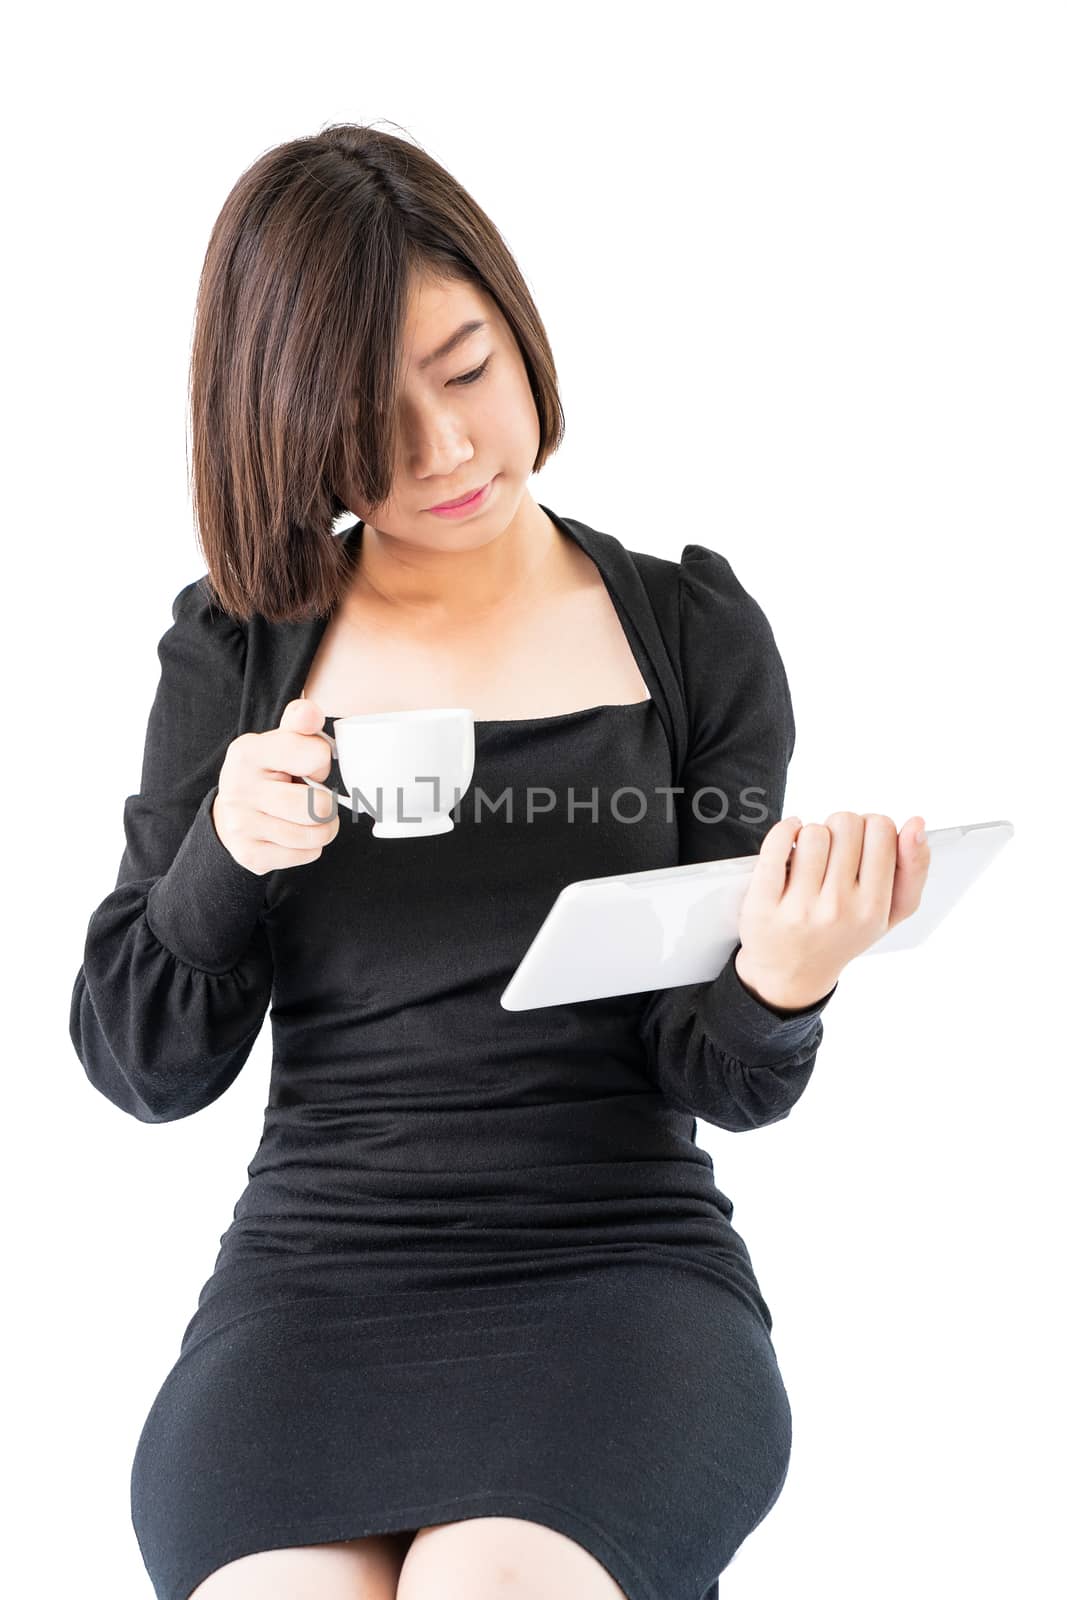 Young woman holding coffee cup and digital tablet isolated on white background